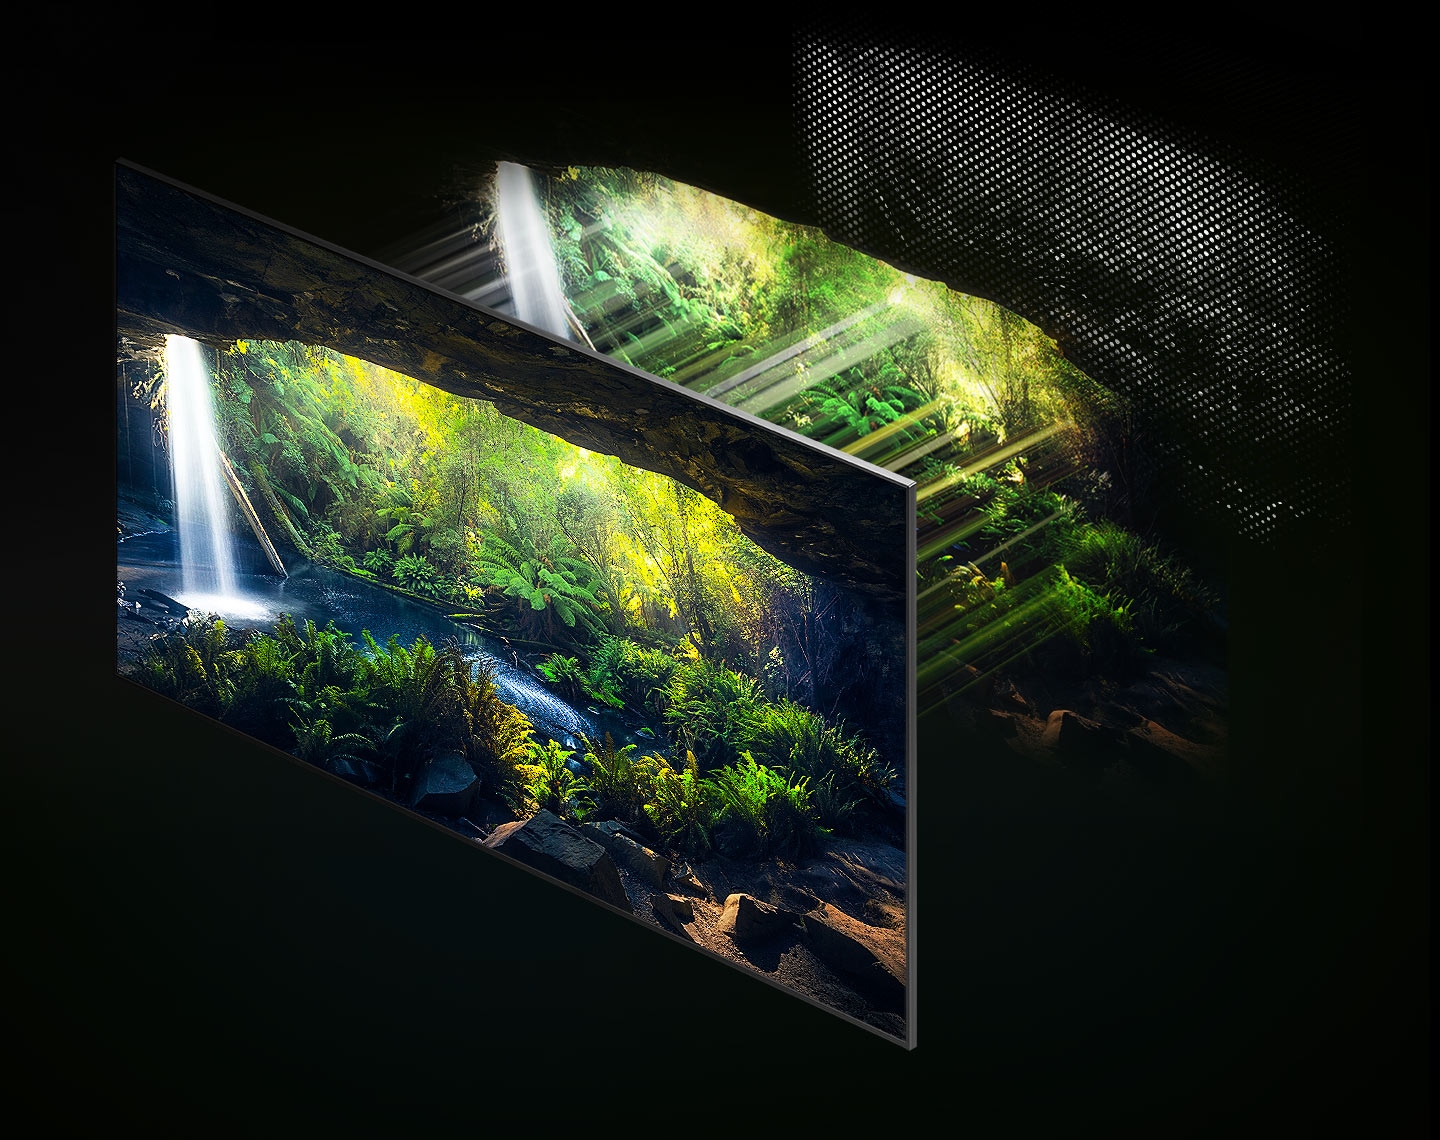 Through the Quantum Mini LED and microlayer, the beautiful forest screen seen from inside a cave is displayed in detail in bright and dark areas, showing very clearly.